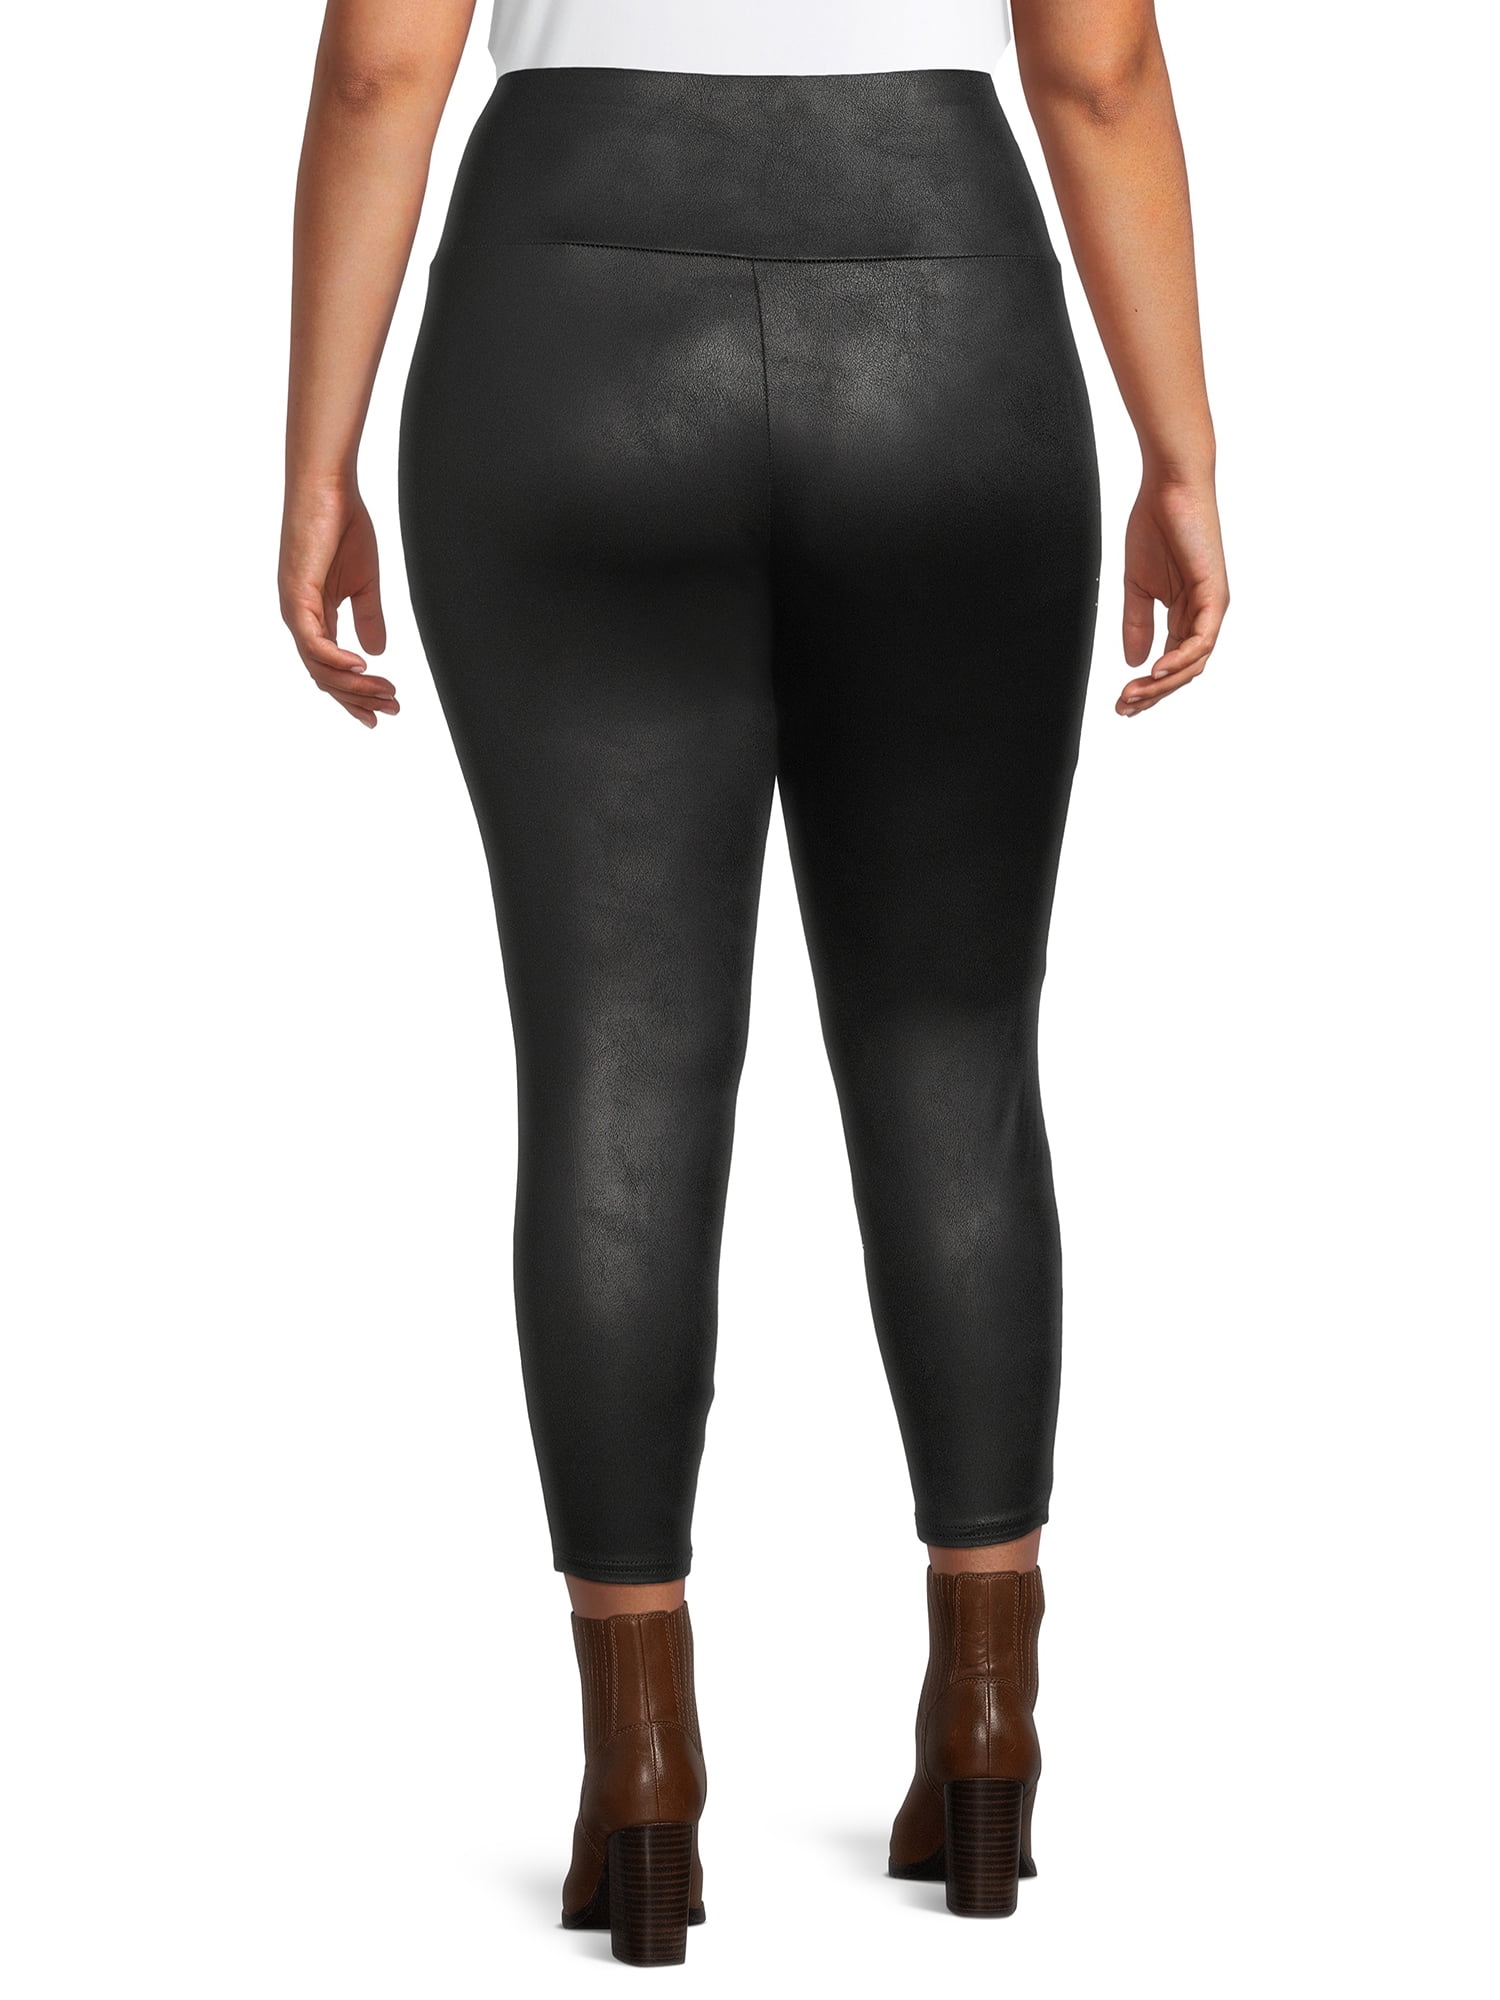 ▷ Terra & Sky Women's Plus Size Fitted High Rise Printed Leggings NEW -  CENTRO COMERCIAL CASTELLANA 200 ◁